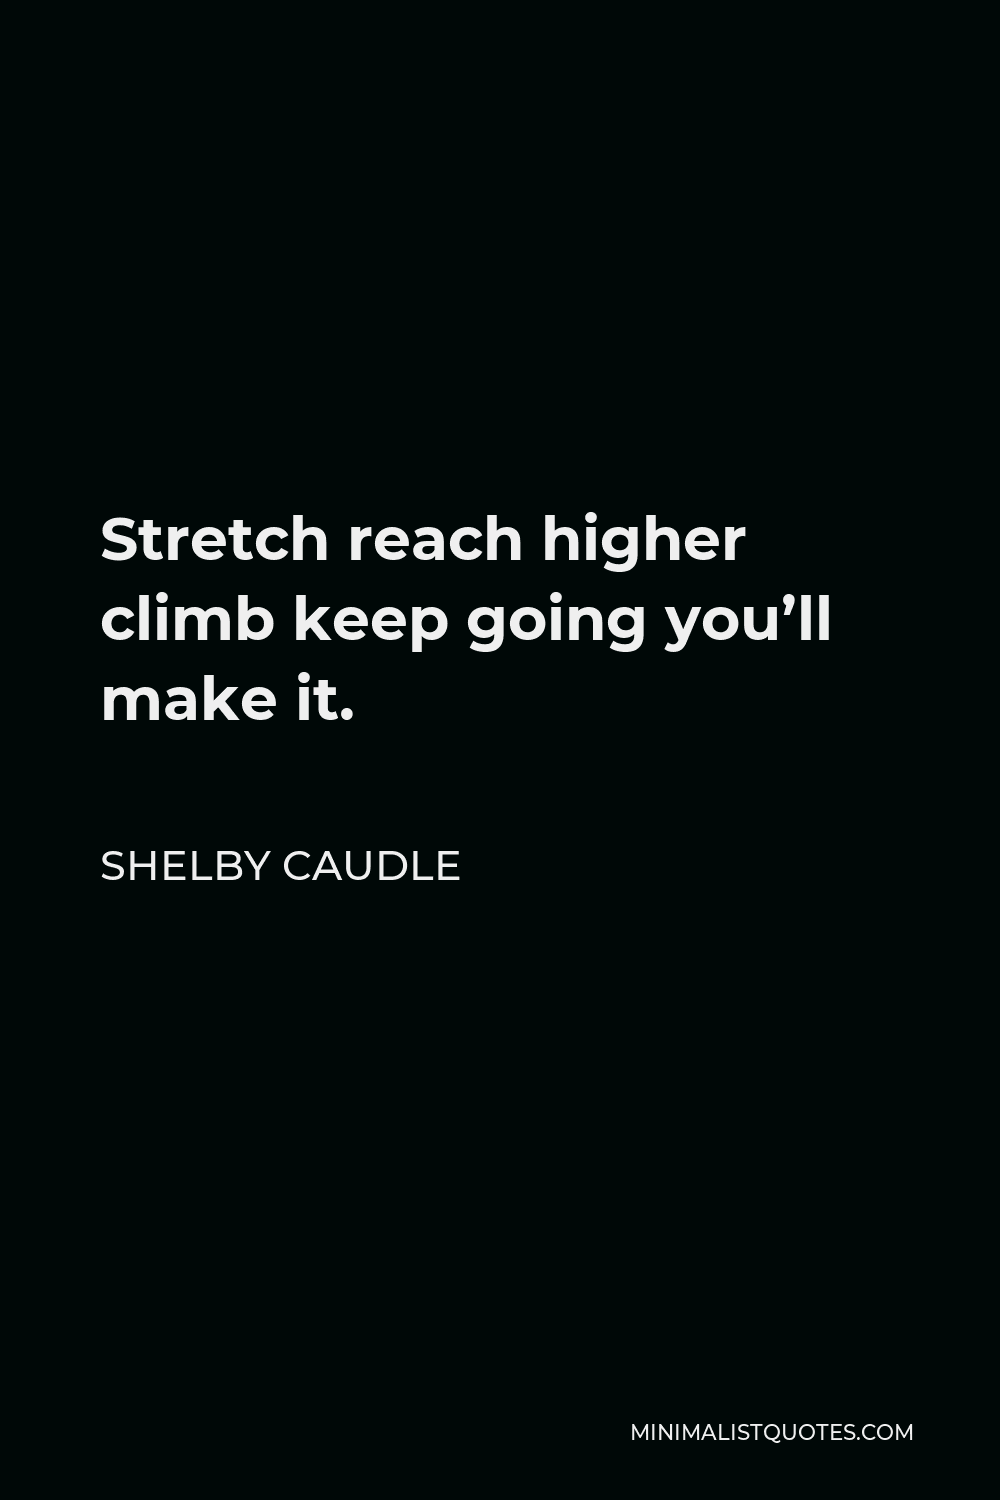 Shelby Caudle Quote - Stretch reach higher climb keep going you’ll make it.